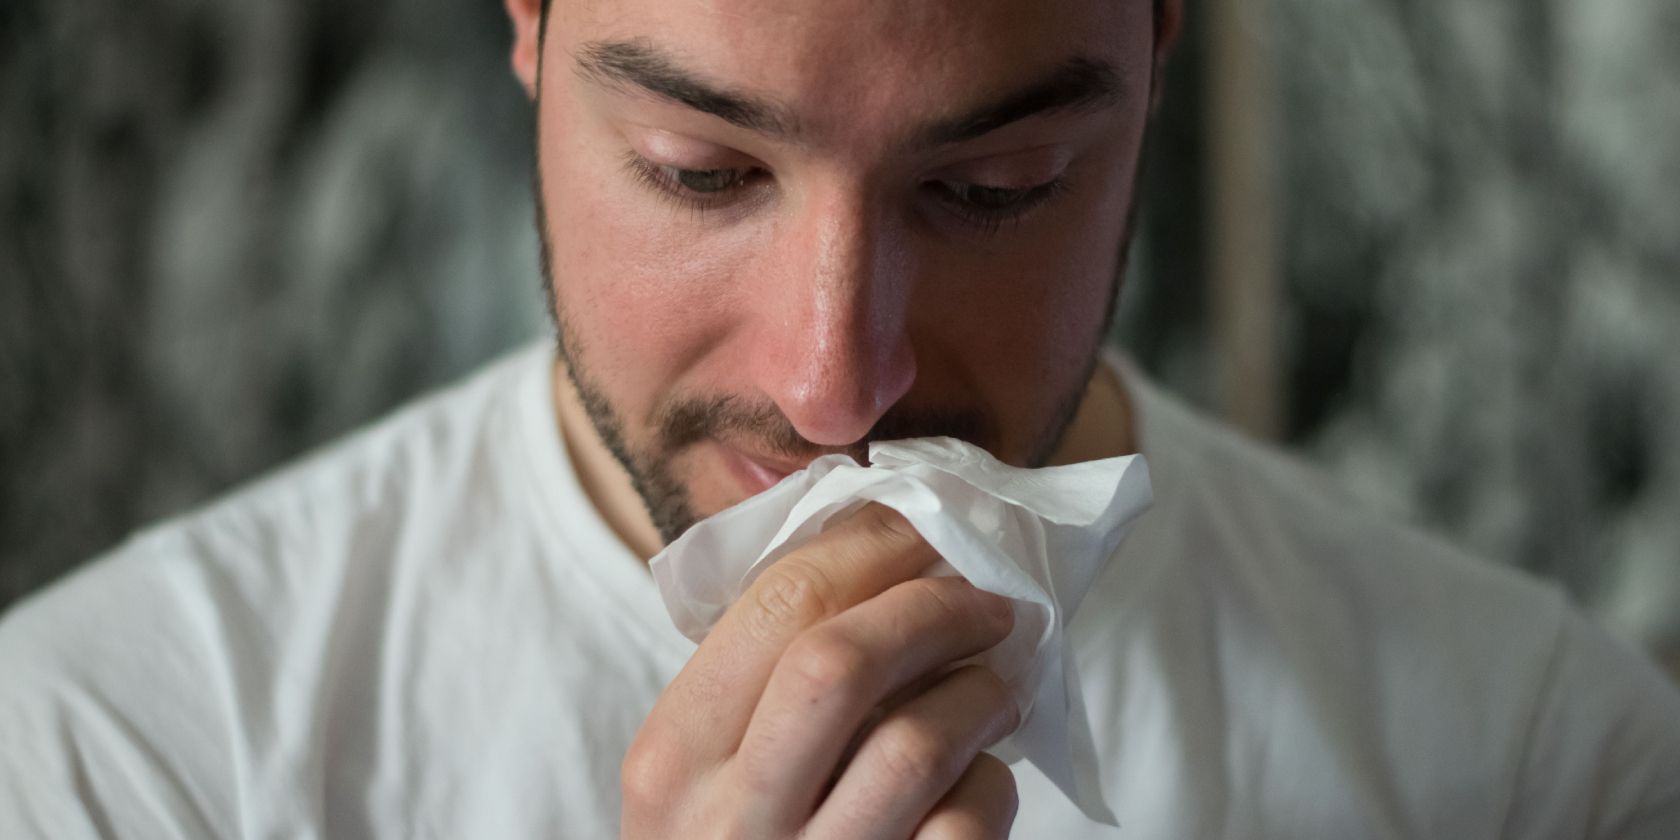 Man holding tissue to his nose as he sneezes